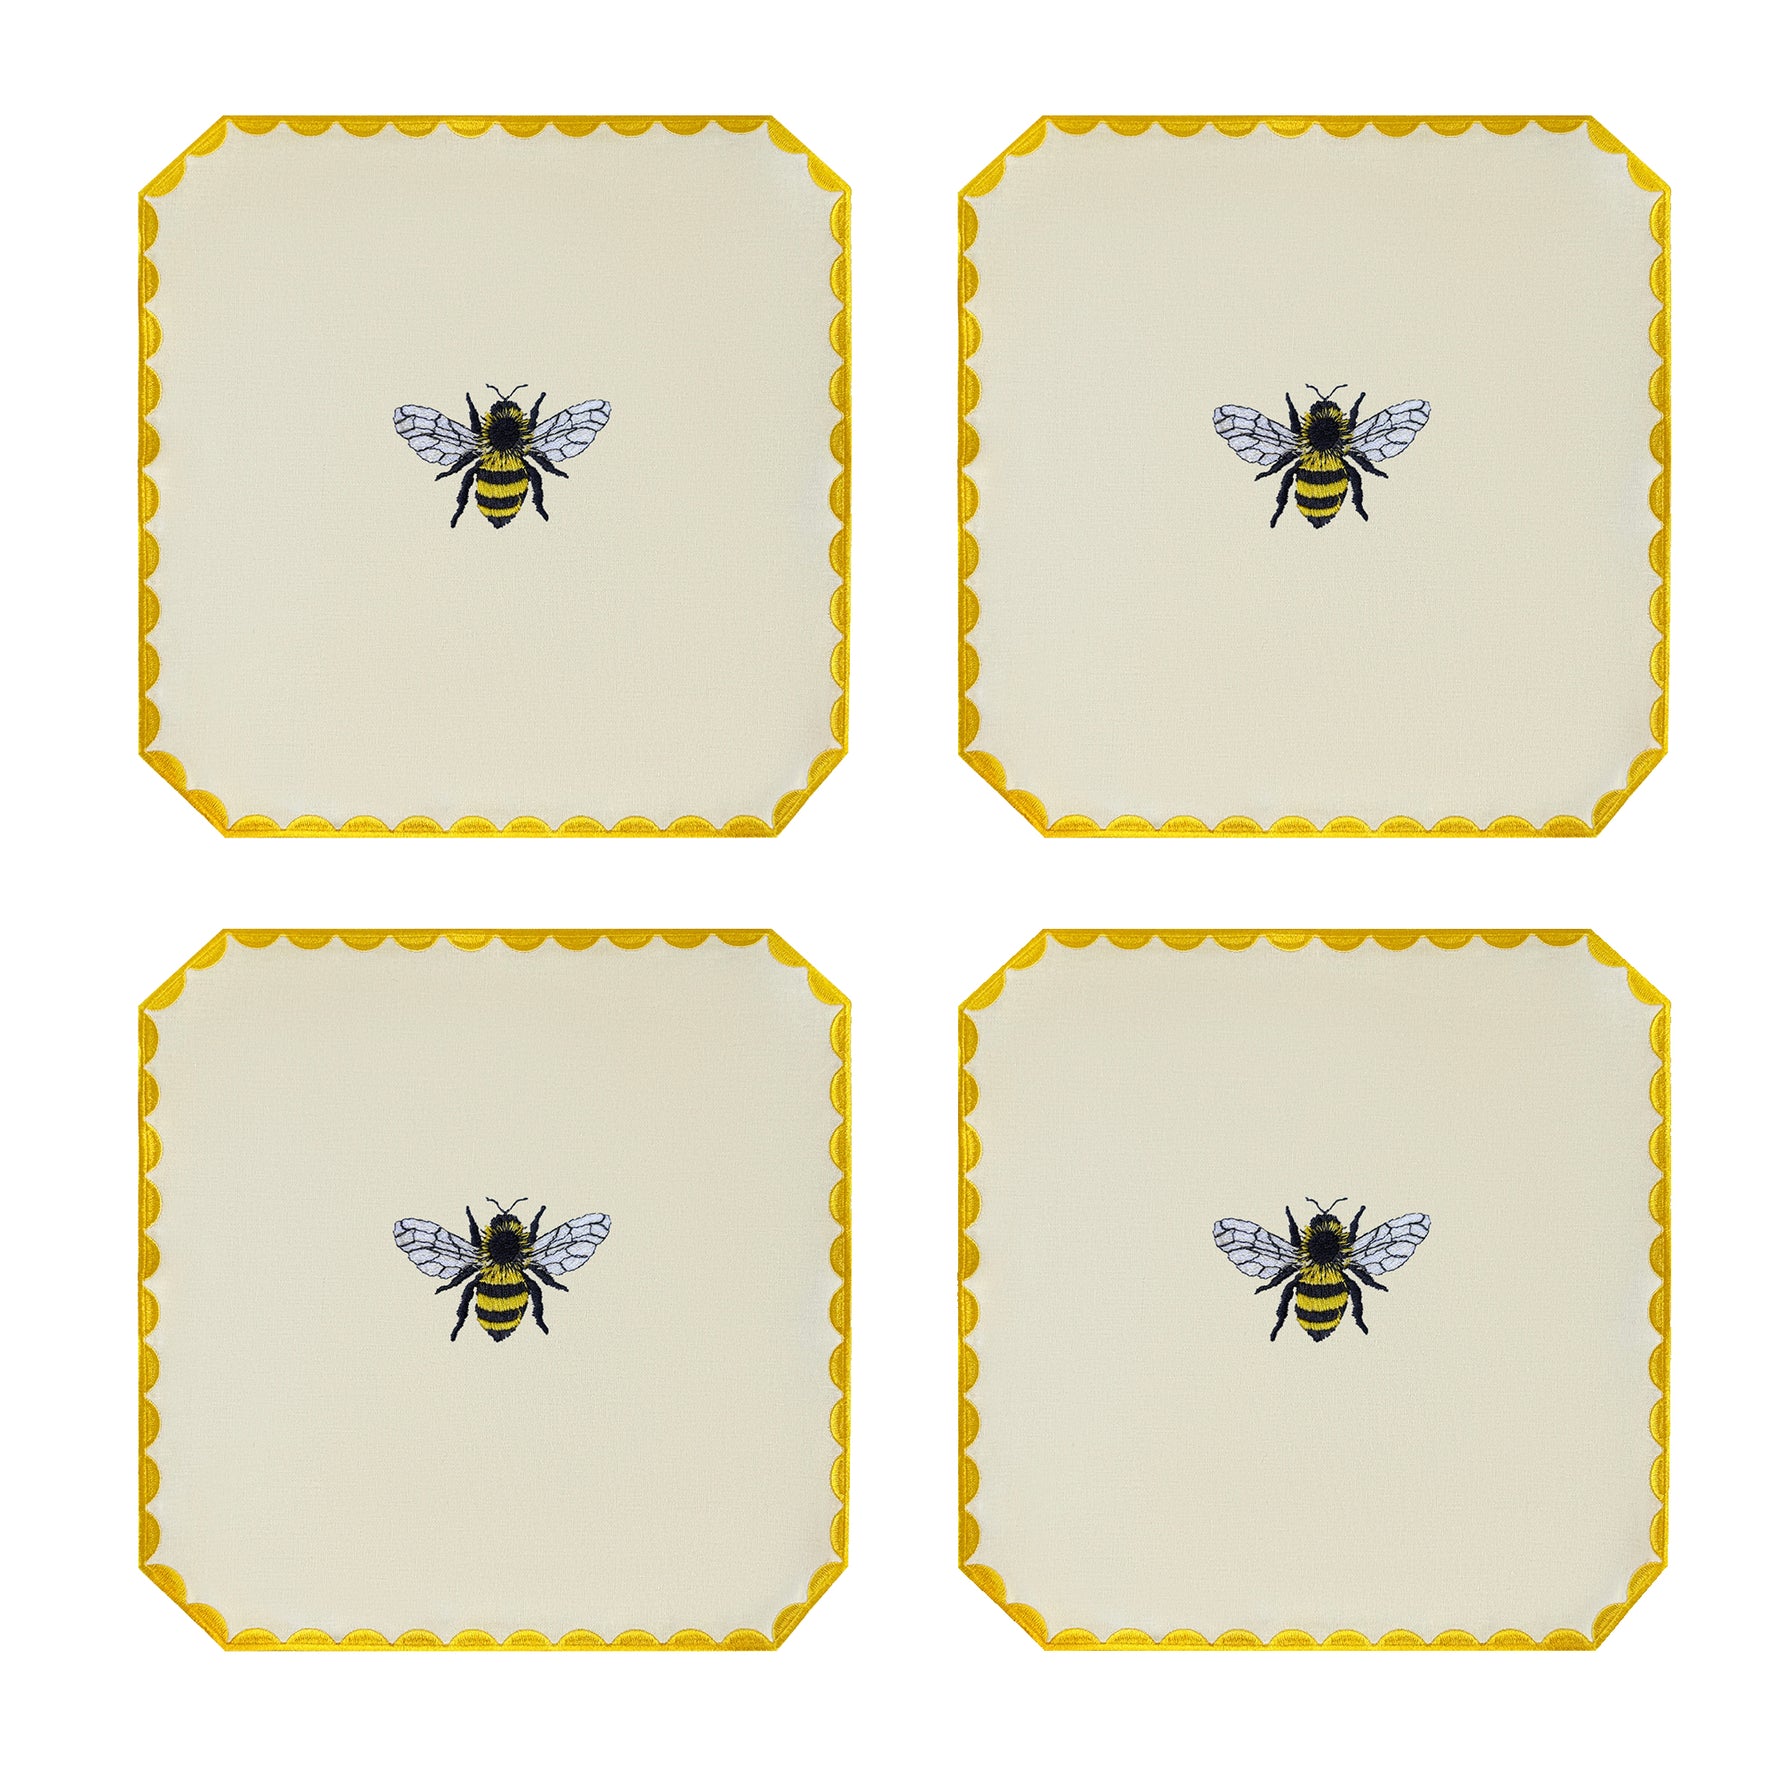 Embroidered Bee Placemats | Set of 4